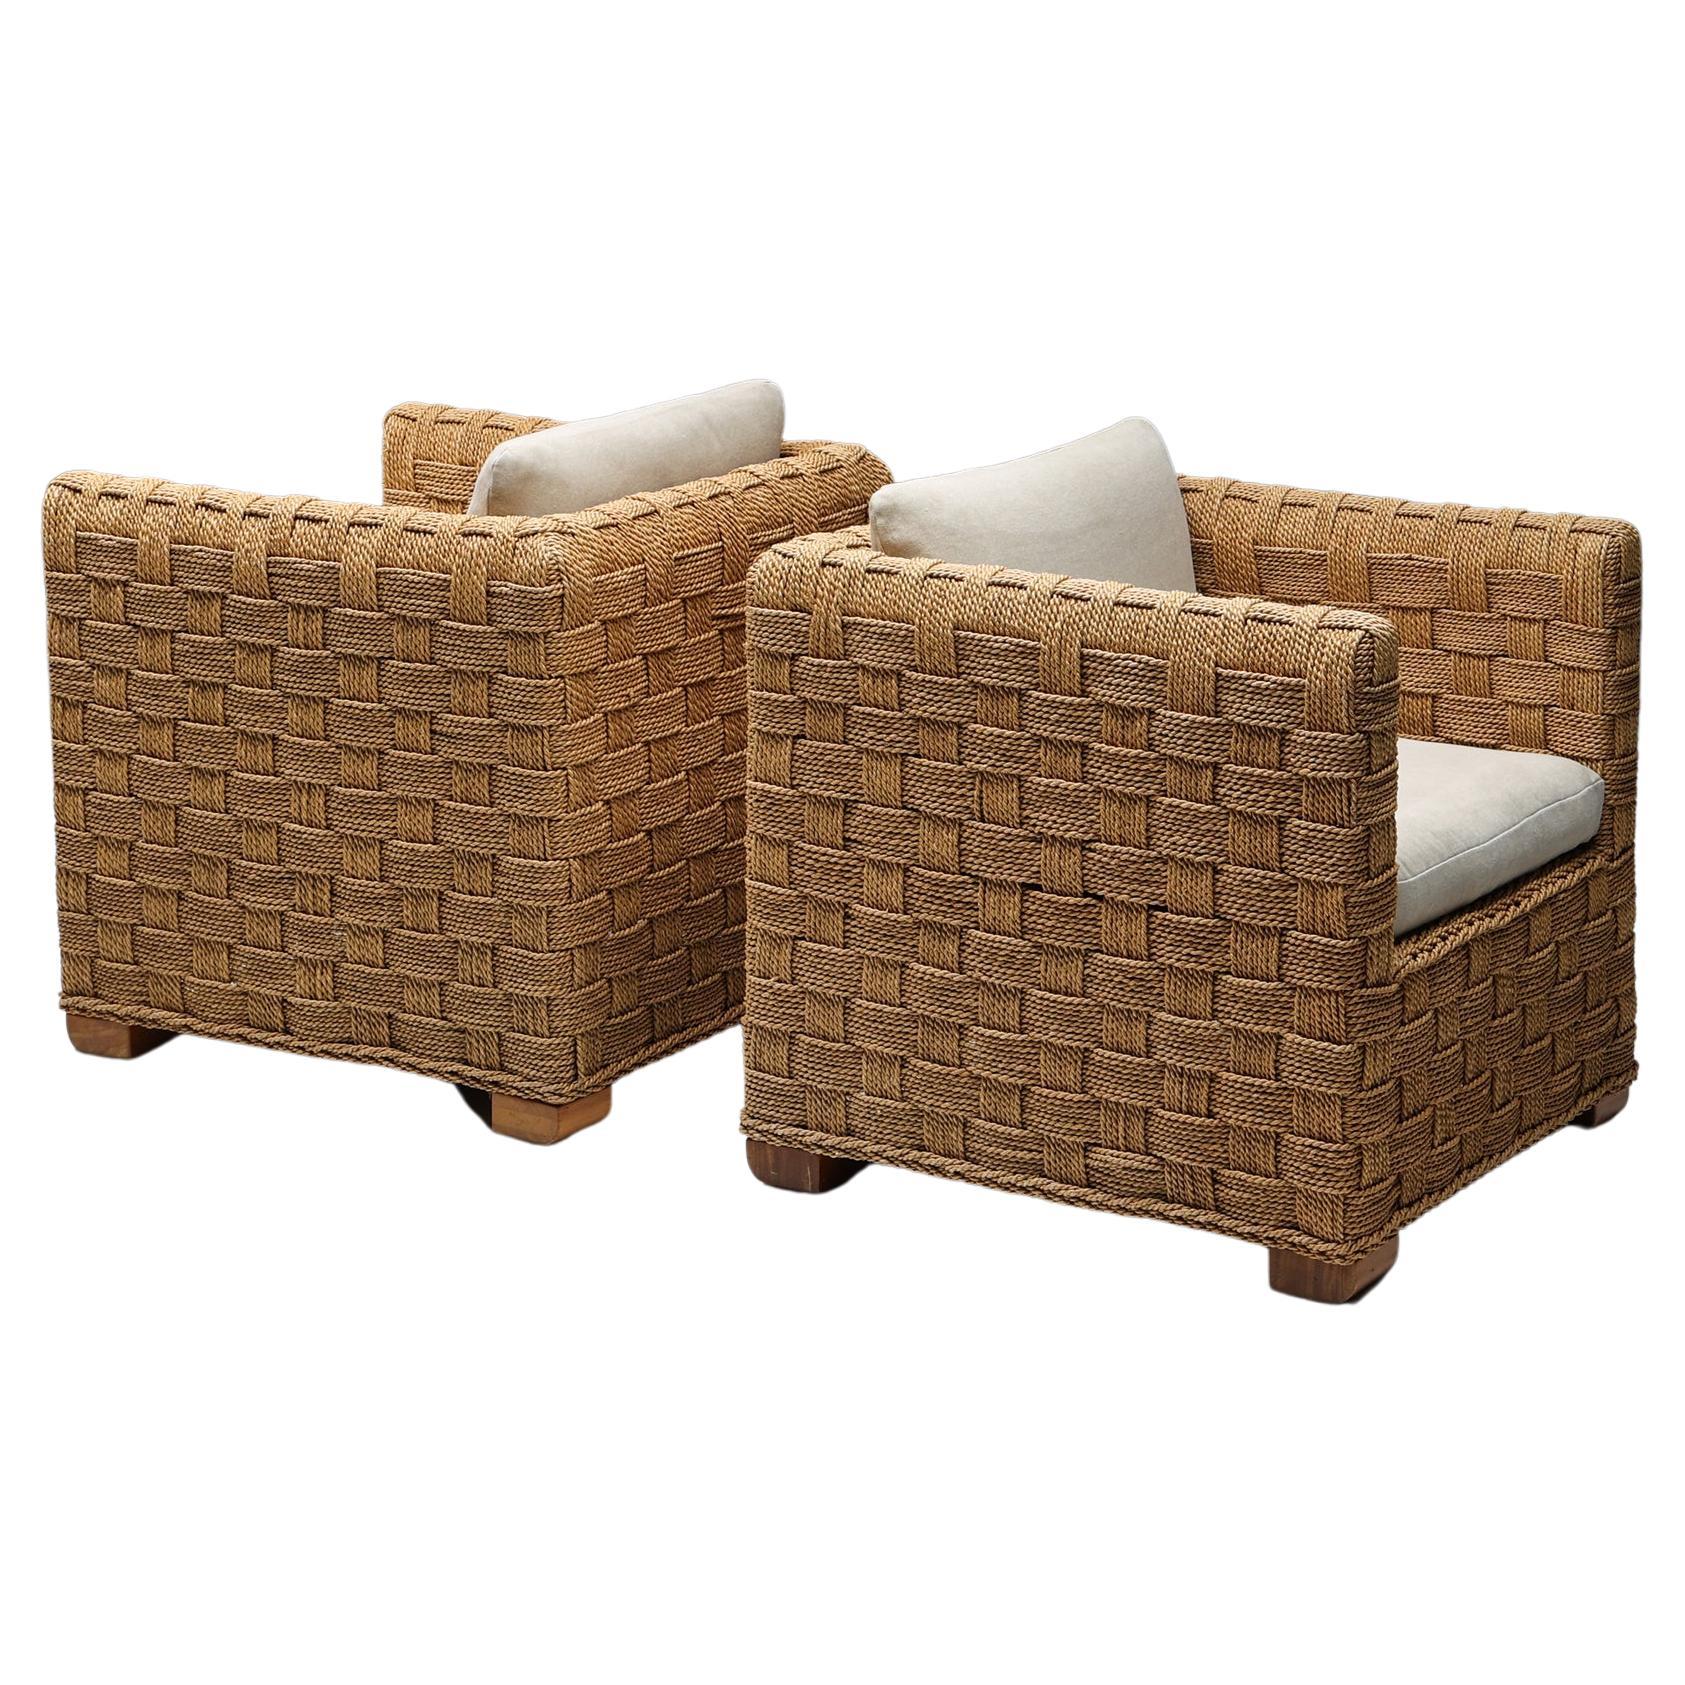 Rattan Lounge Chairs in Style of Vivai del Sud, Tropicalist, 1970's